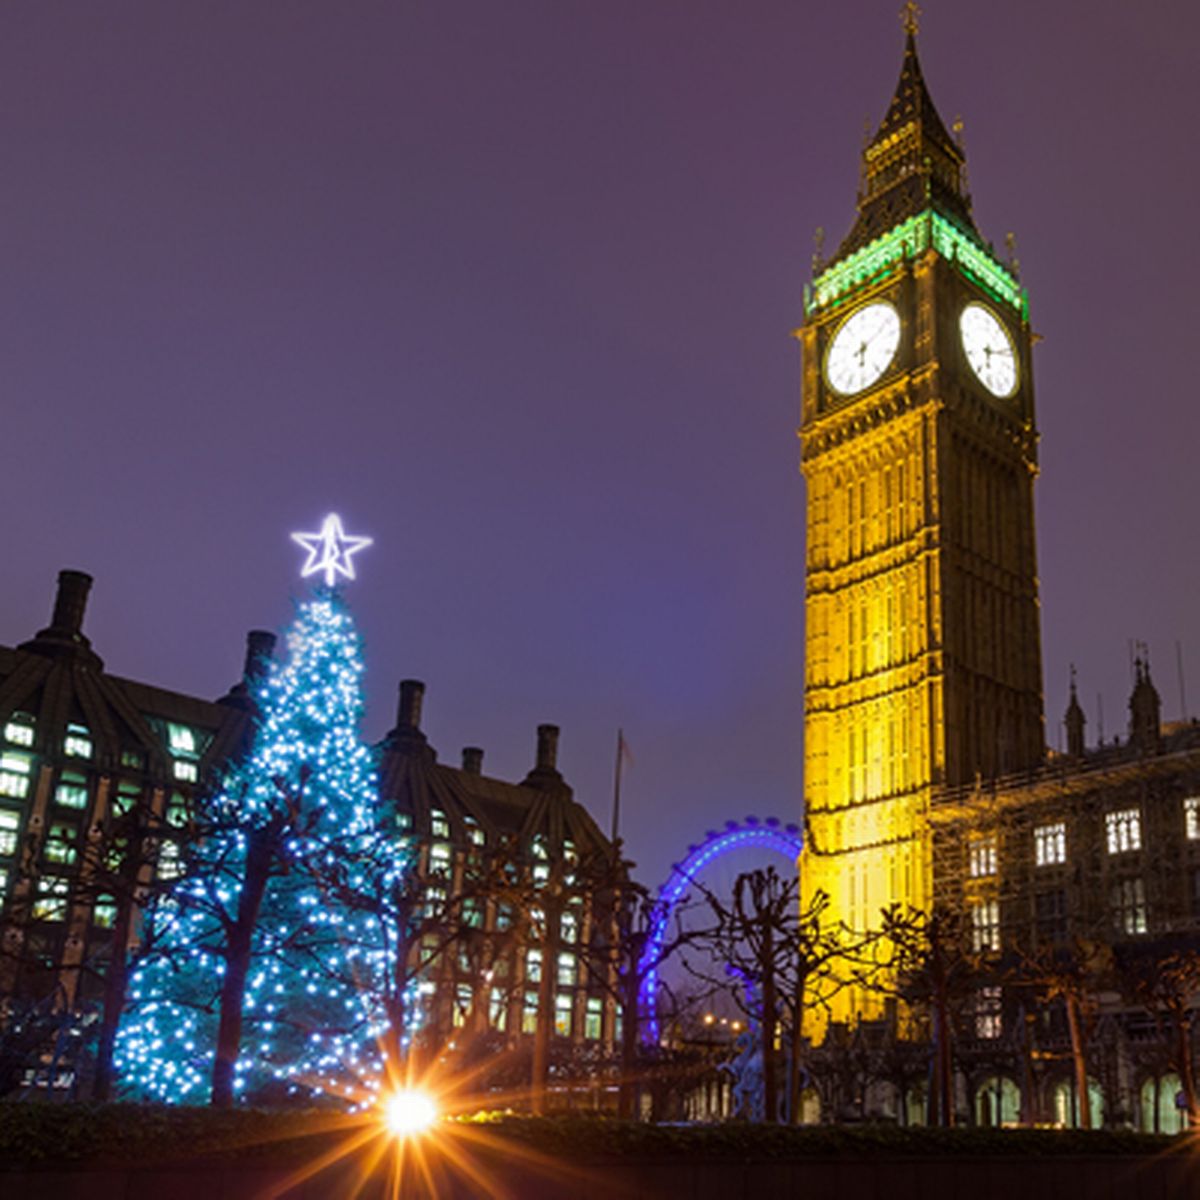 big ben lit up in front of dark night sky christimas tree with blue lights